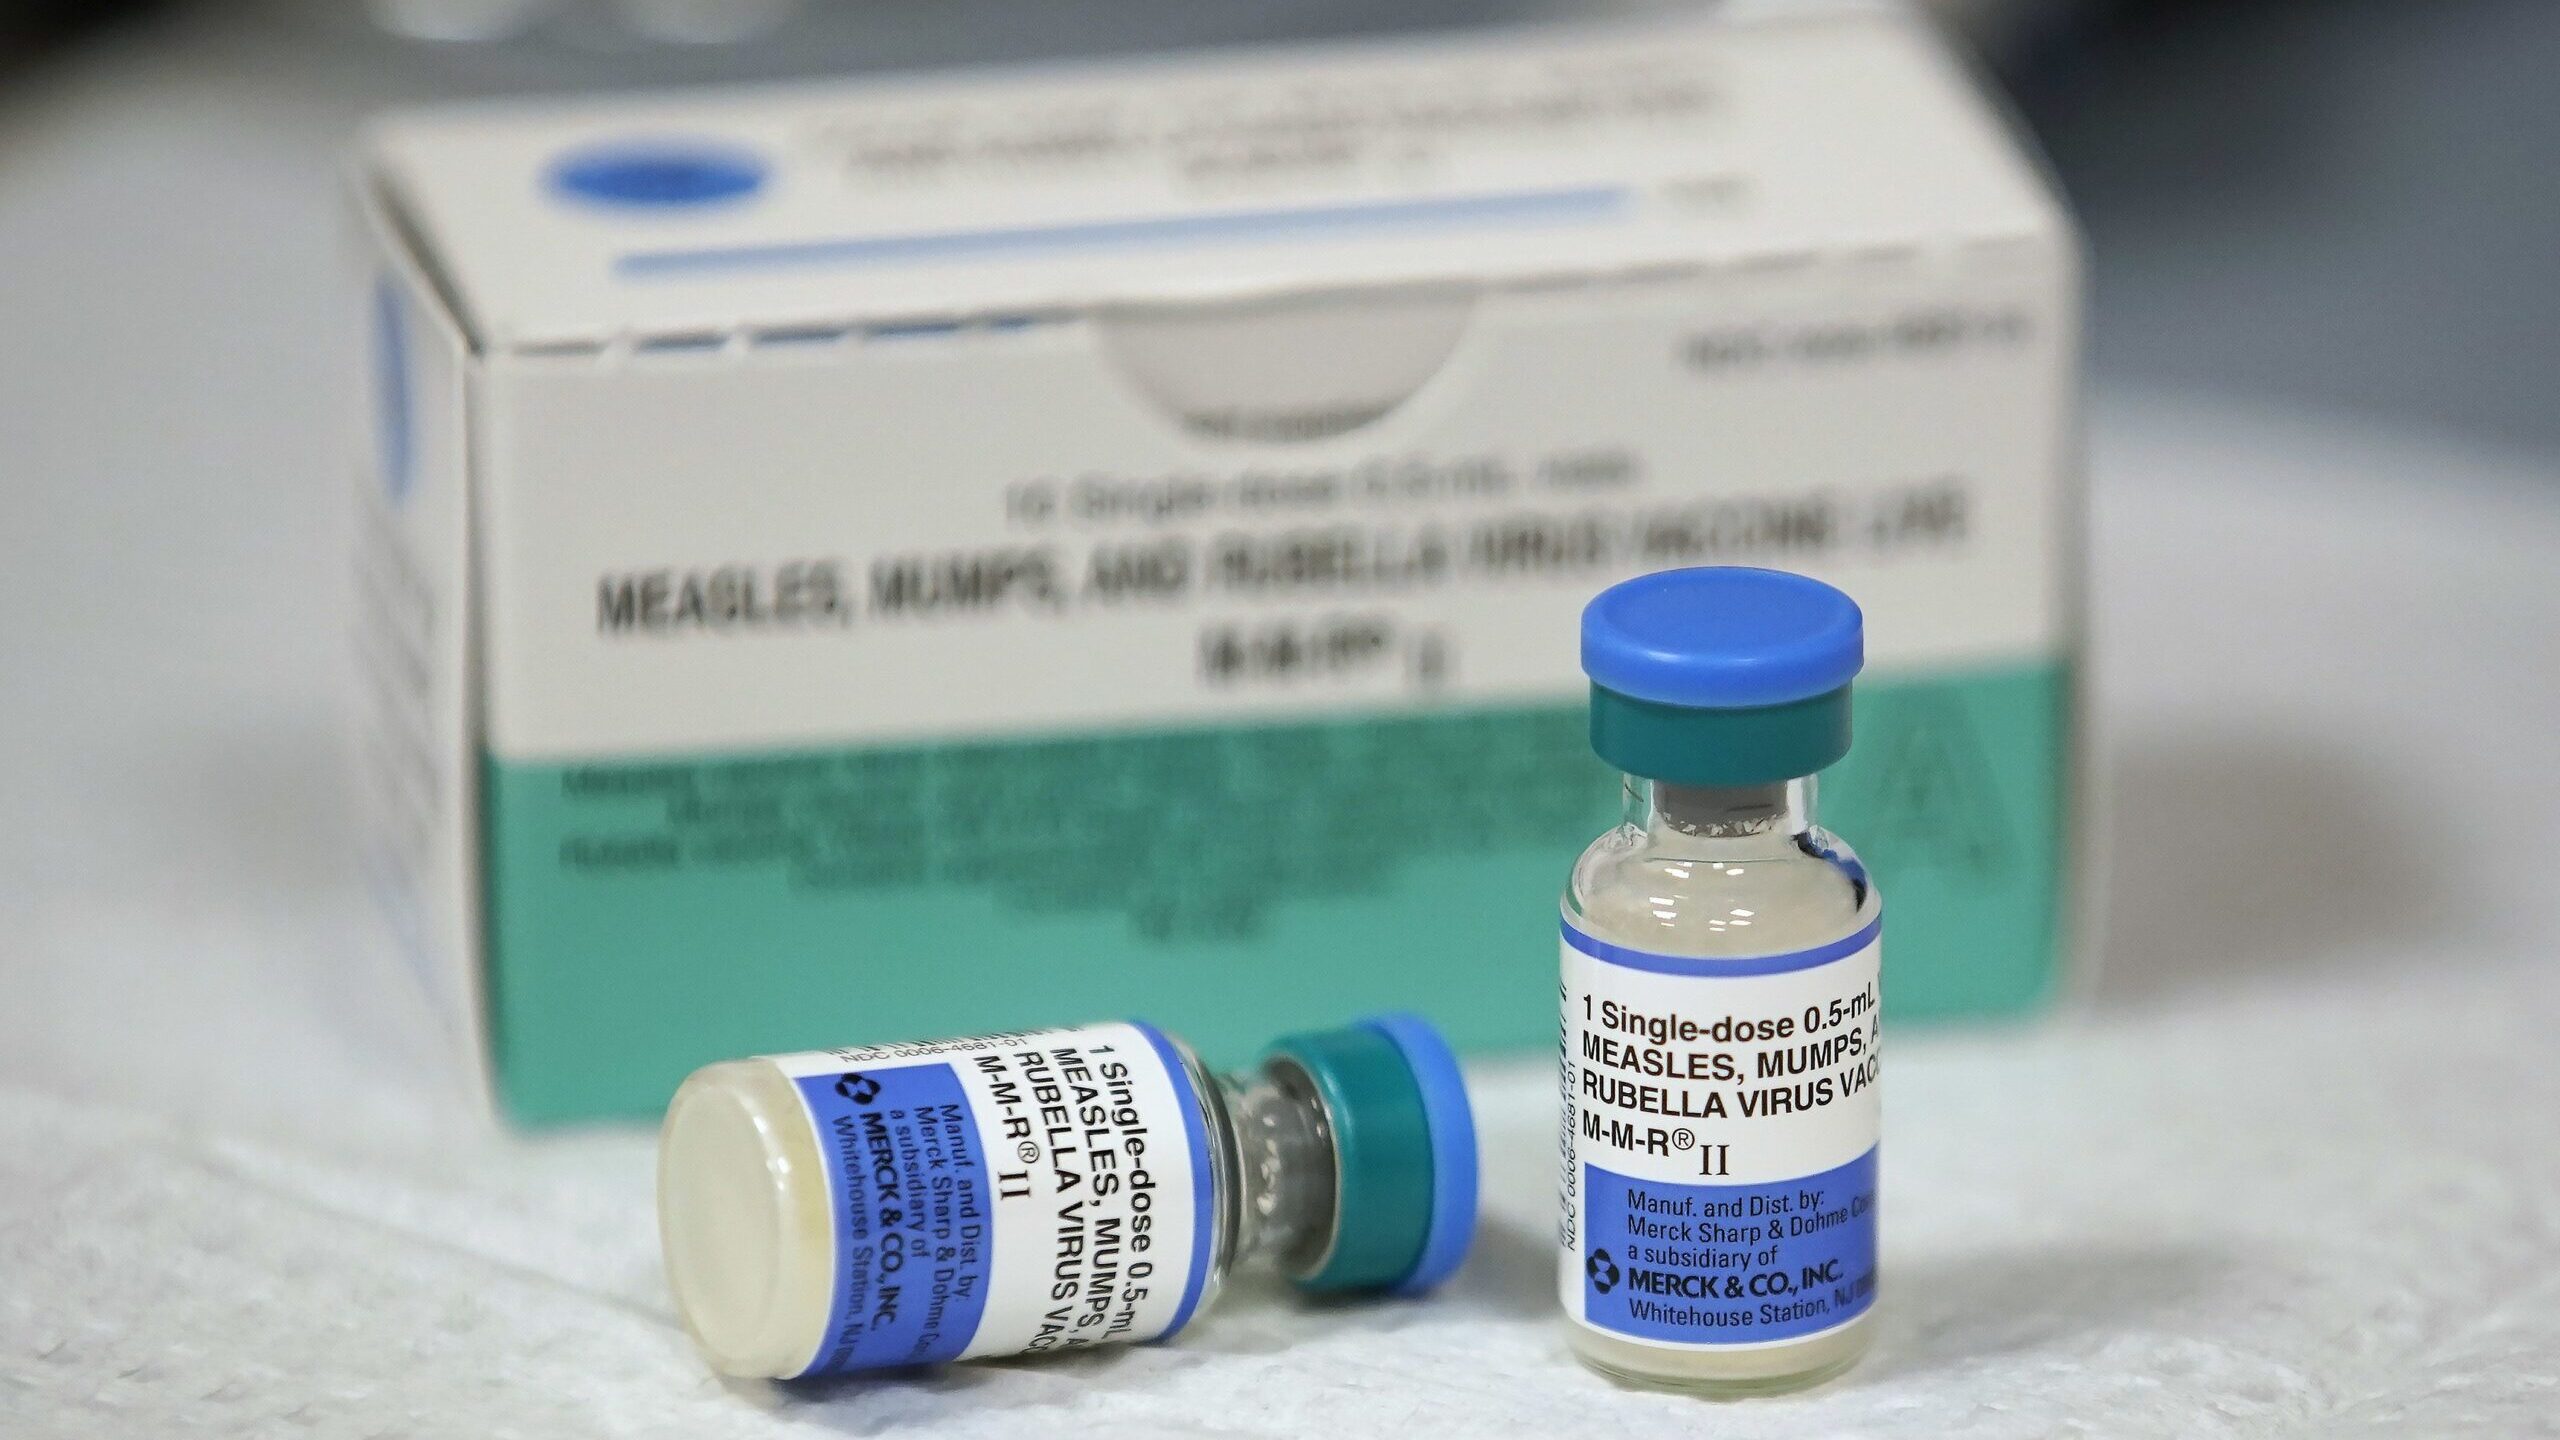 About 92% of US children have been vaccinated against measles, mumps and rubella by age 2, accordin...